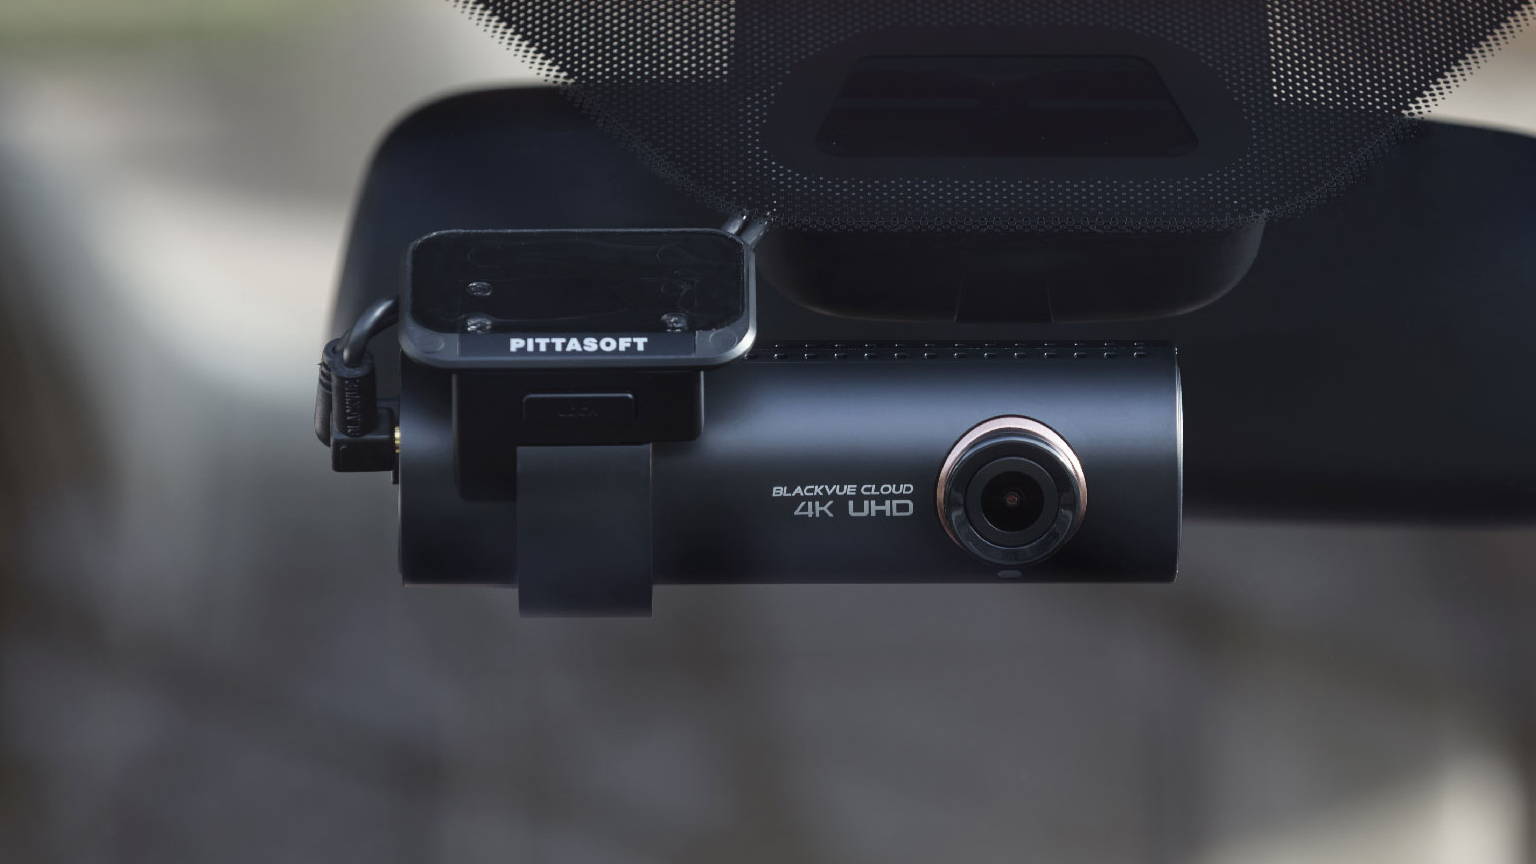 Do you want a clean and discreet dashcam setup without the unwanted wi, dashcam for cars